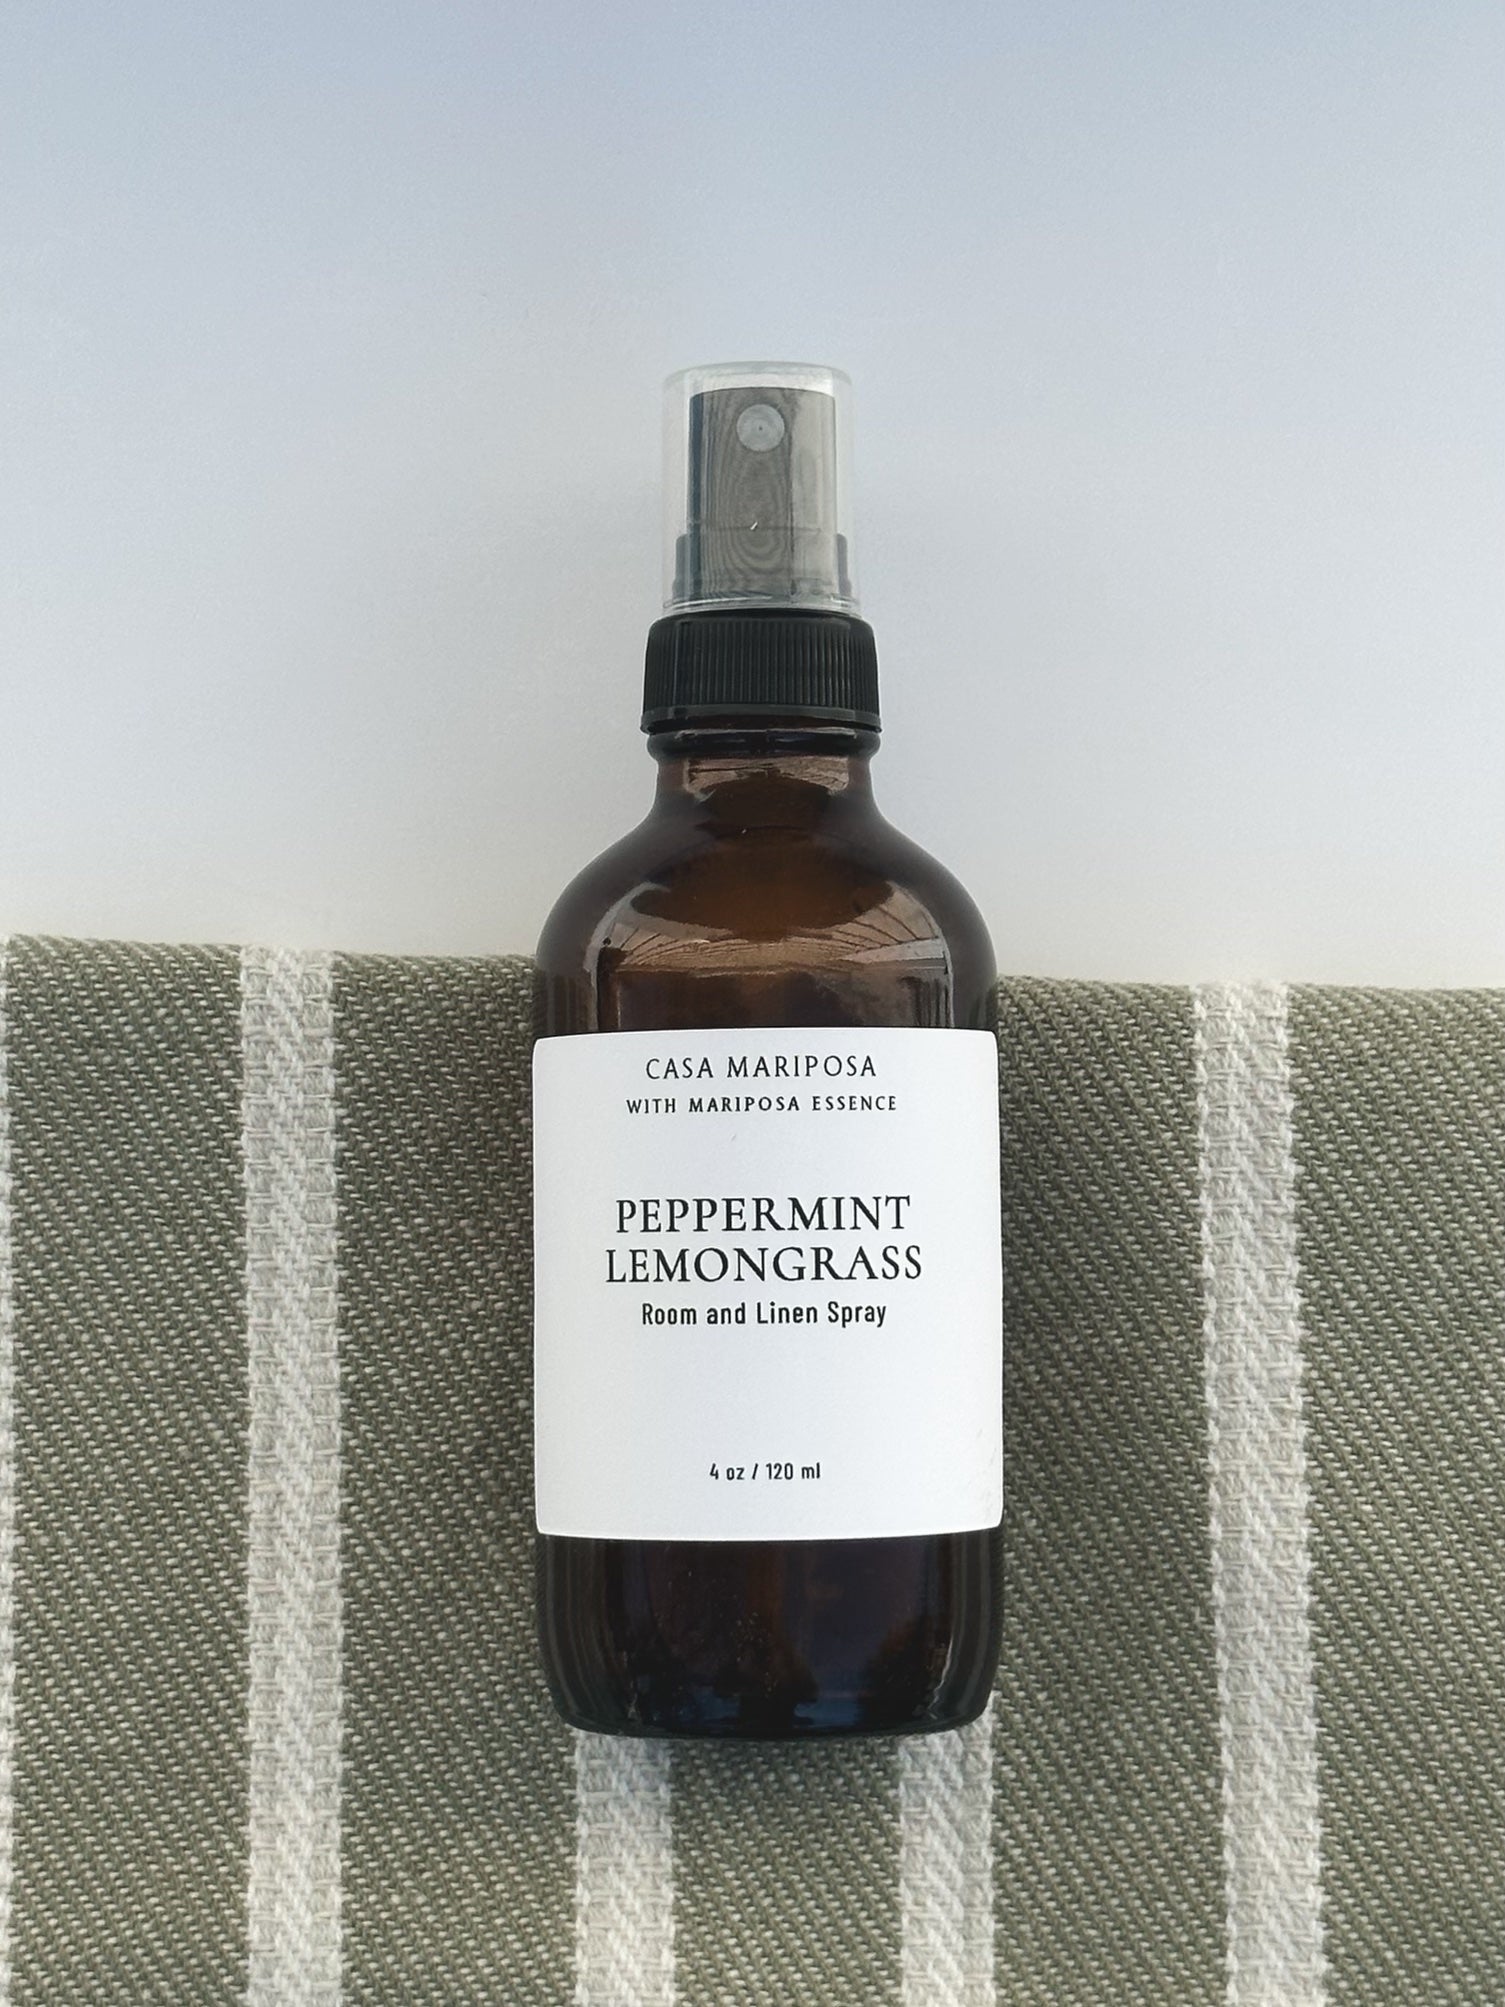 Peppermint Lemongrass Linen and Room Spray displayed with hand towel 